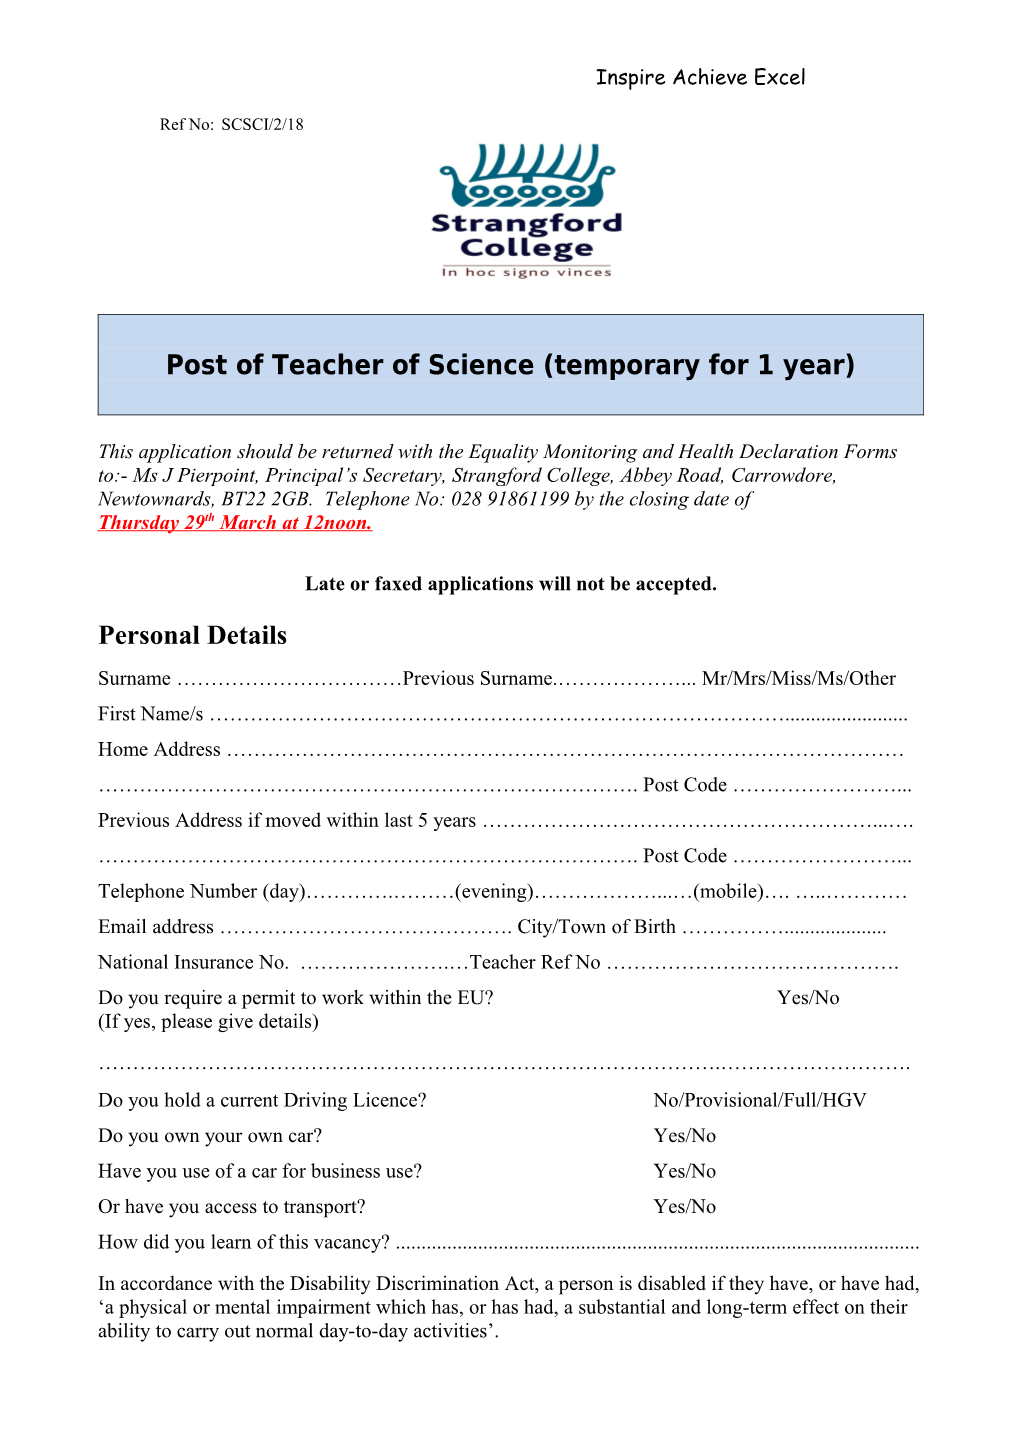 Post of Teacher of Science (Temporary for 1 Year)